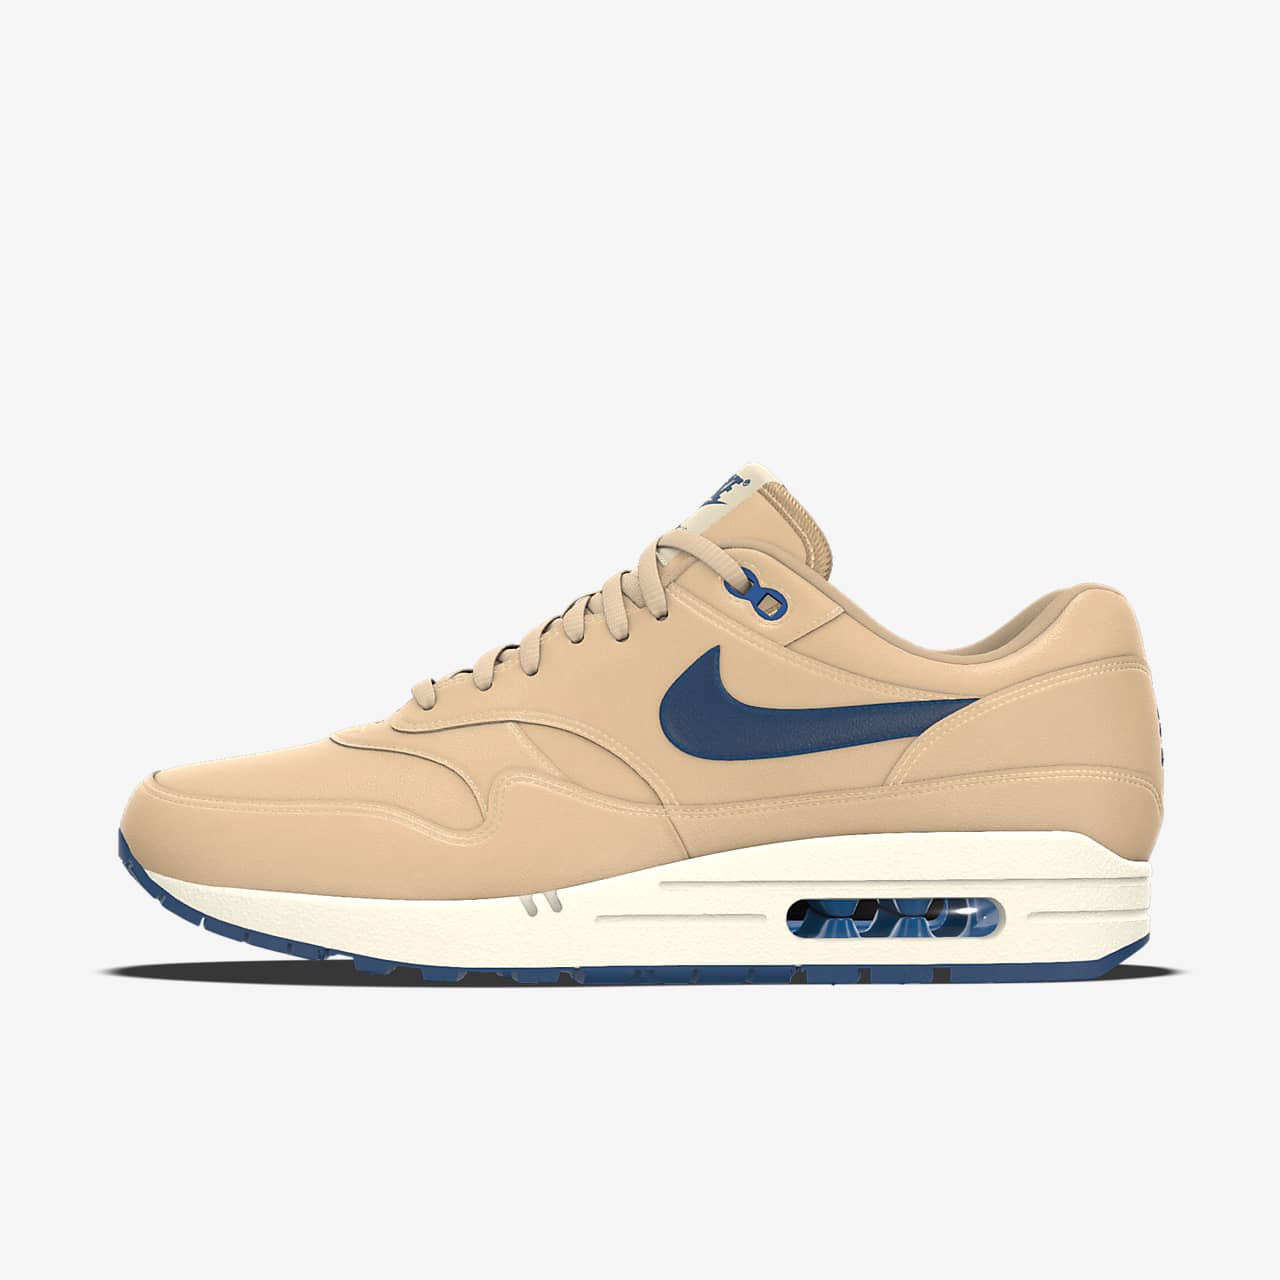 Nike Air Max 1 By You 专属定制运动鞋